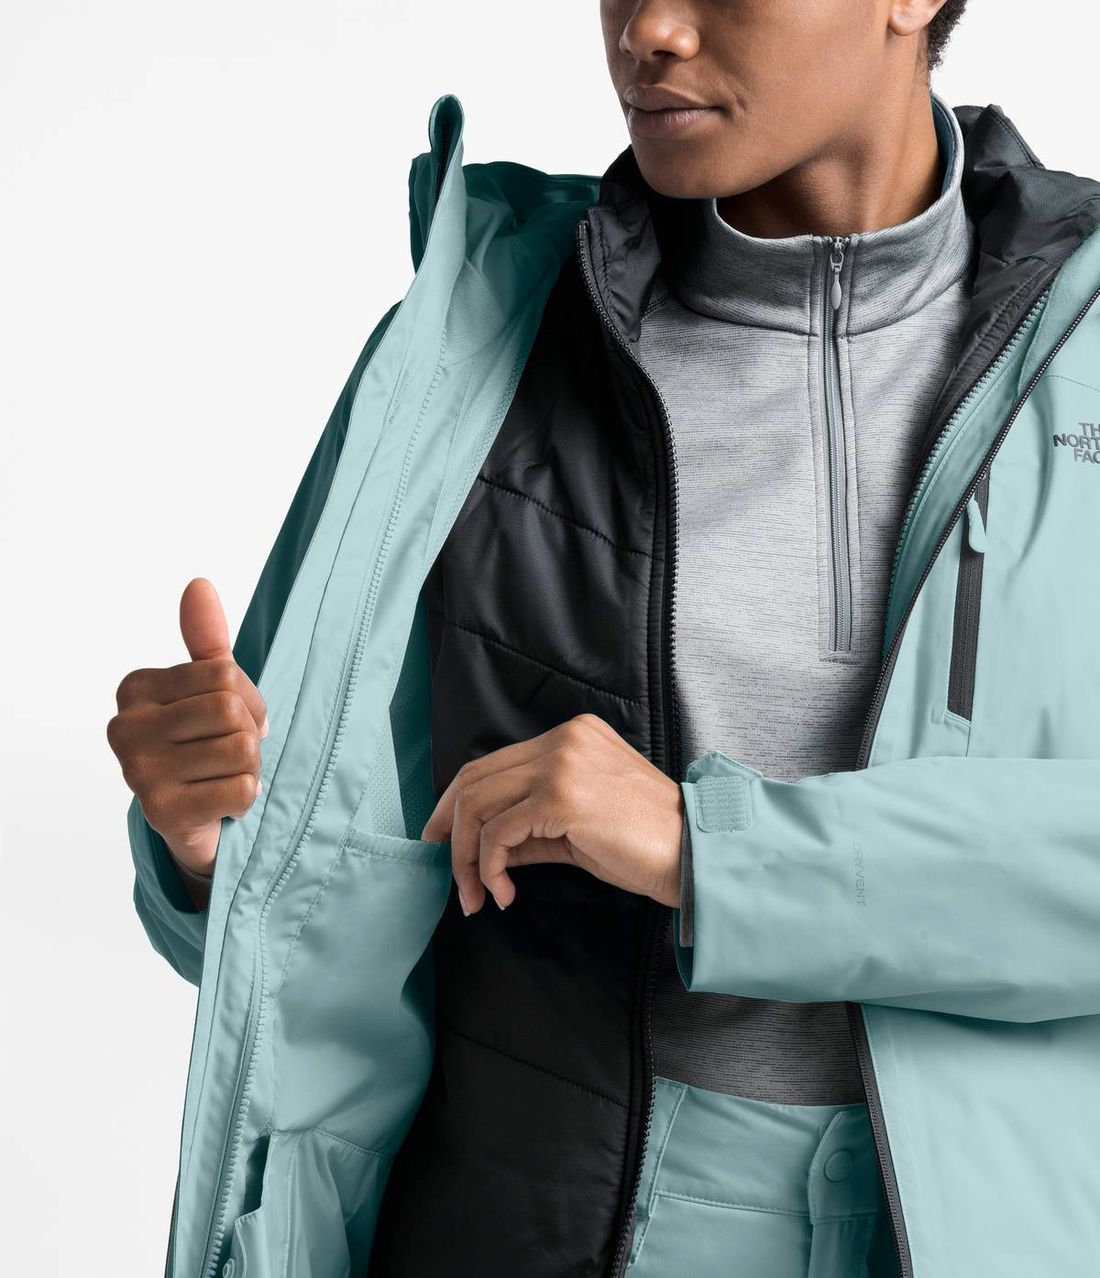 The north face clementine jacket unzipped